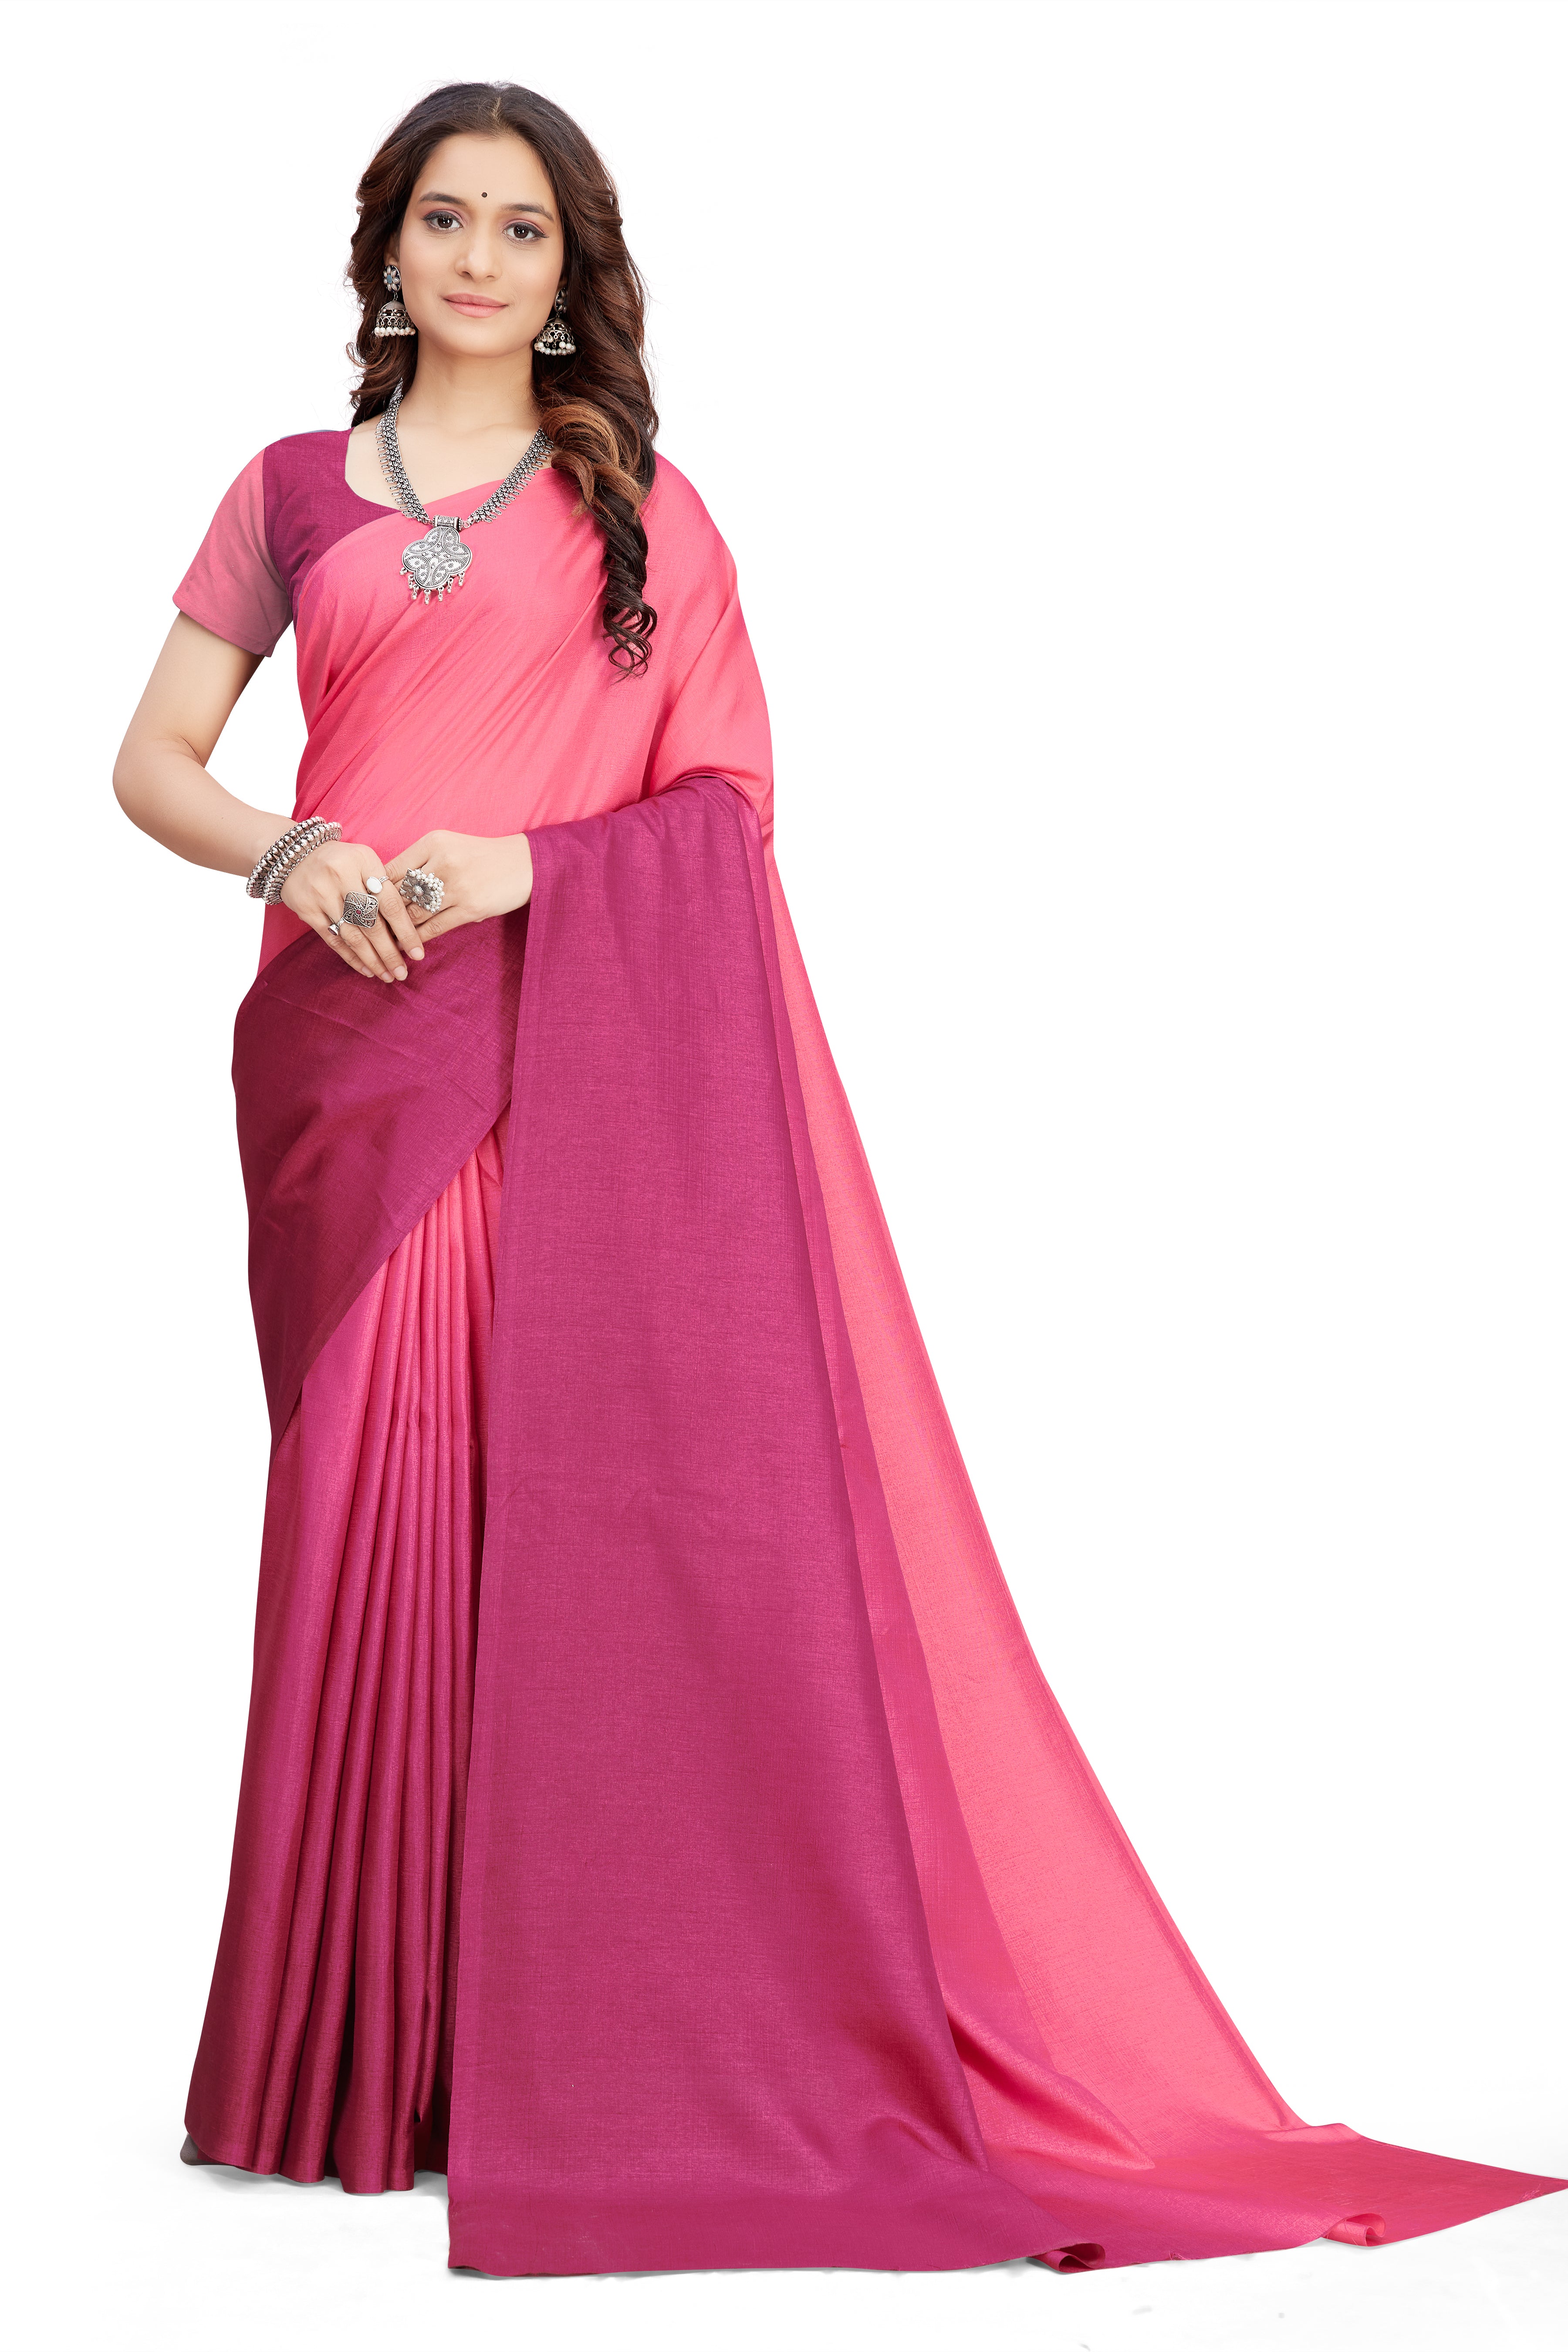 Women's self Woven Solid Textured Dual Shade Festive Wear Silk Blend Sari With Blouse Piece (Pink) - NIMIDHYA